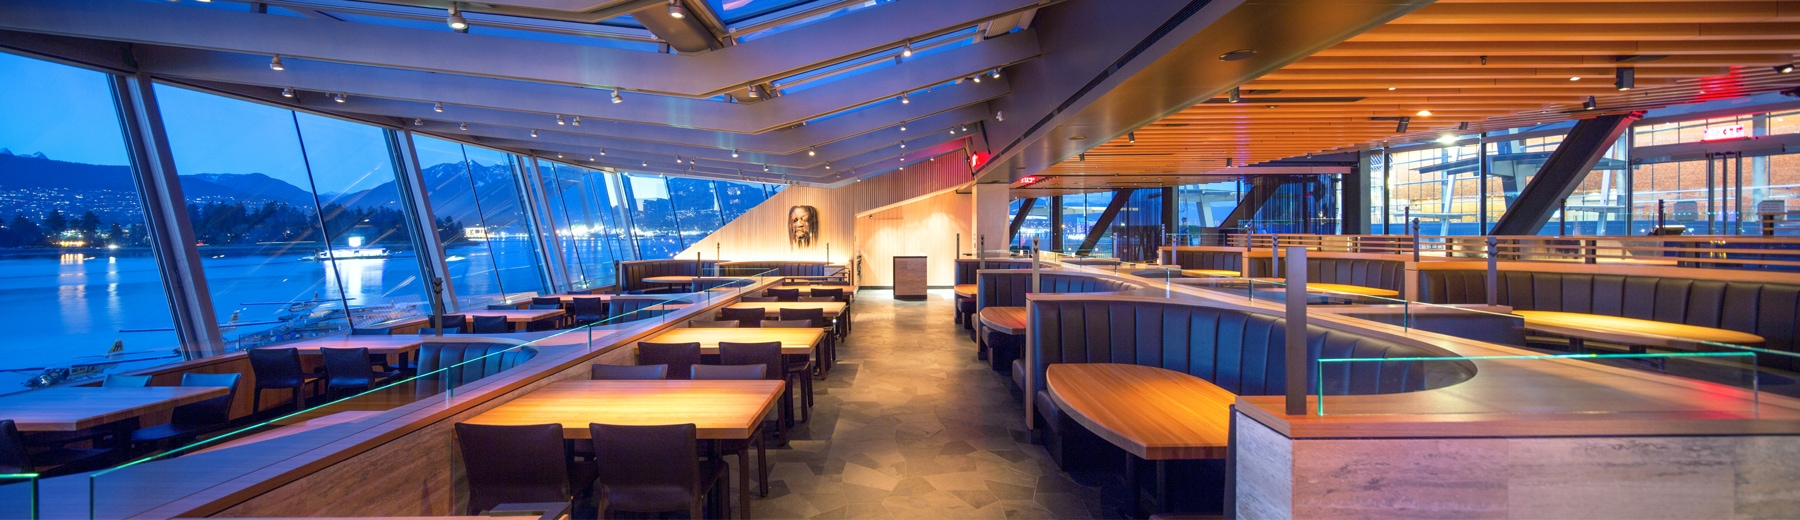 evening interior of cactus club cafe with hardwood furnishing overlooking a panoramic window view of the ocean